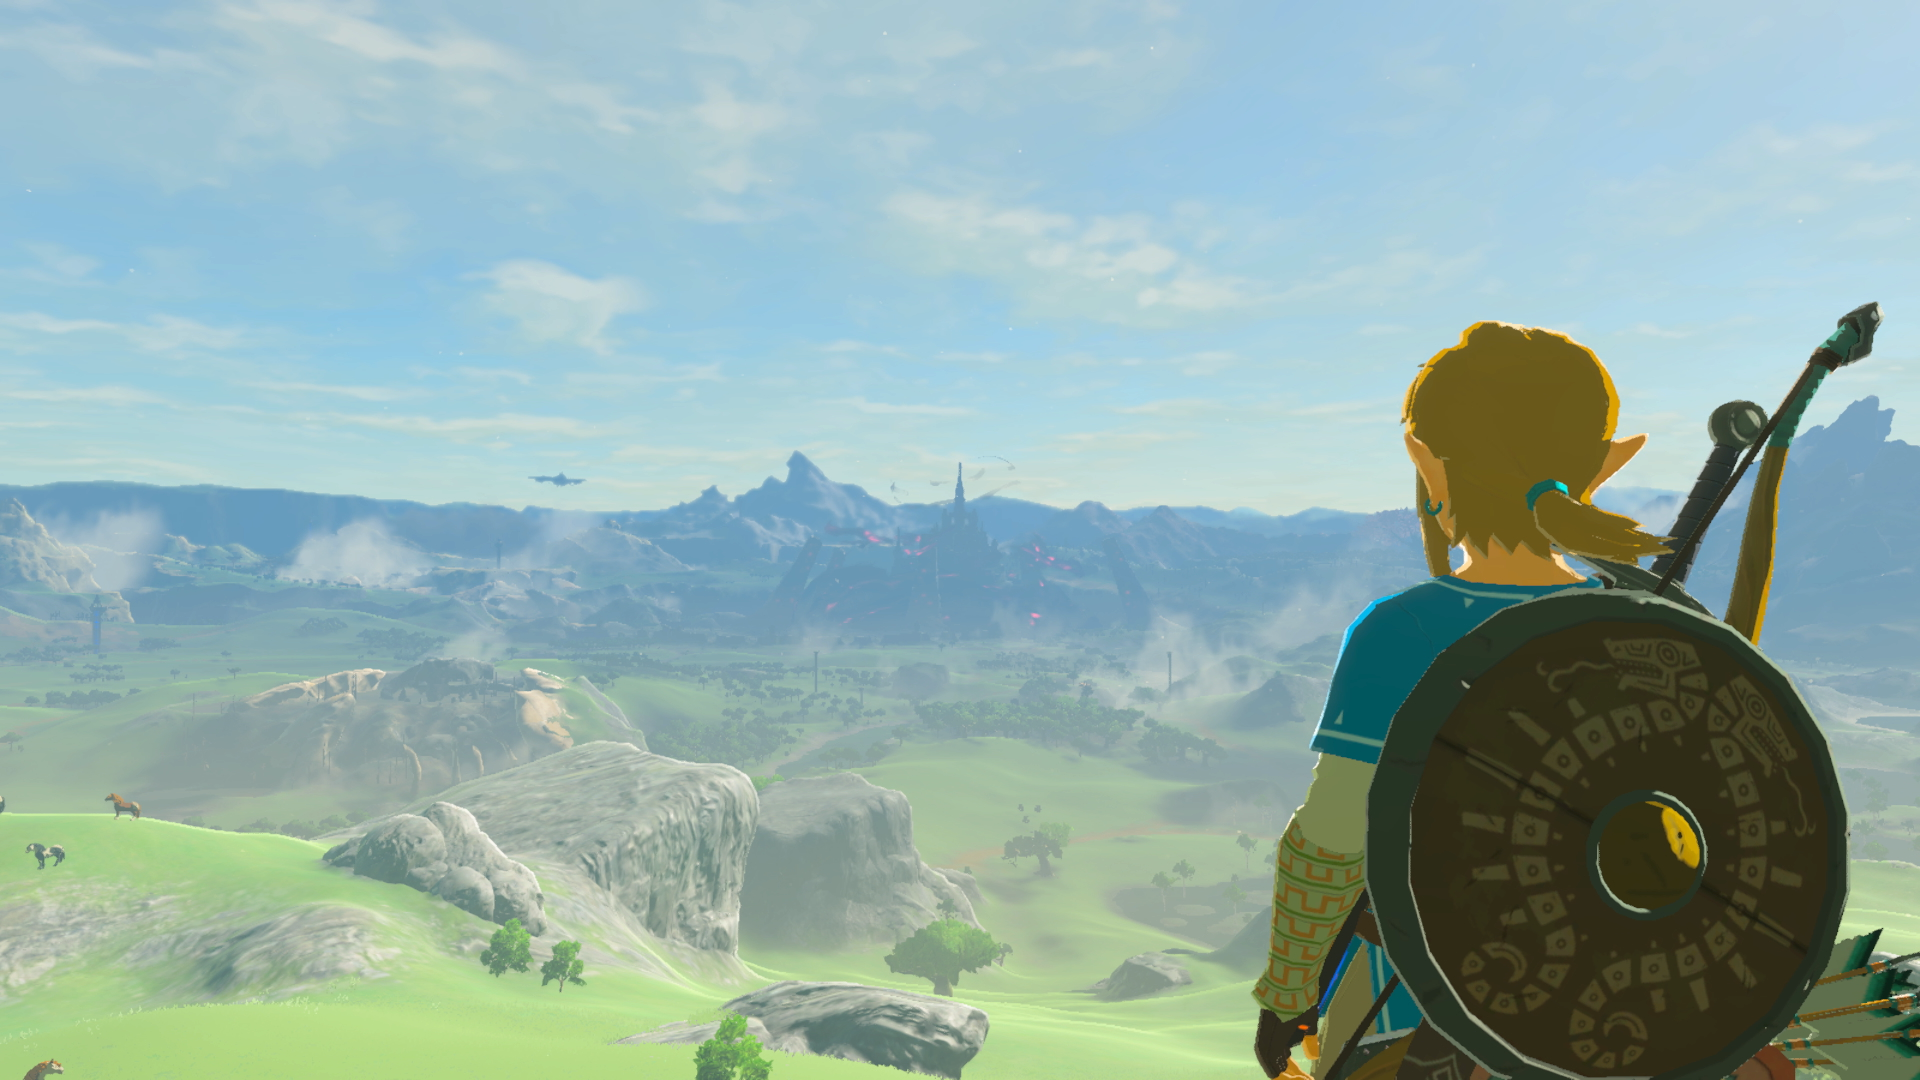 The Legend of Zelda: Breath of the Wild' was the most